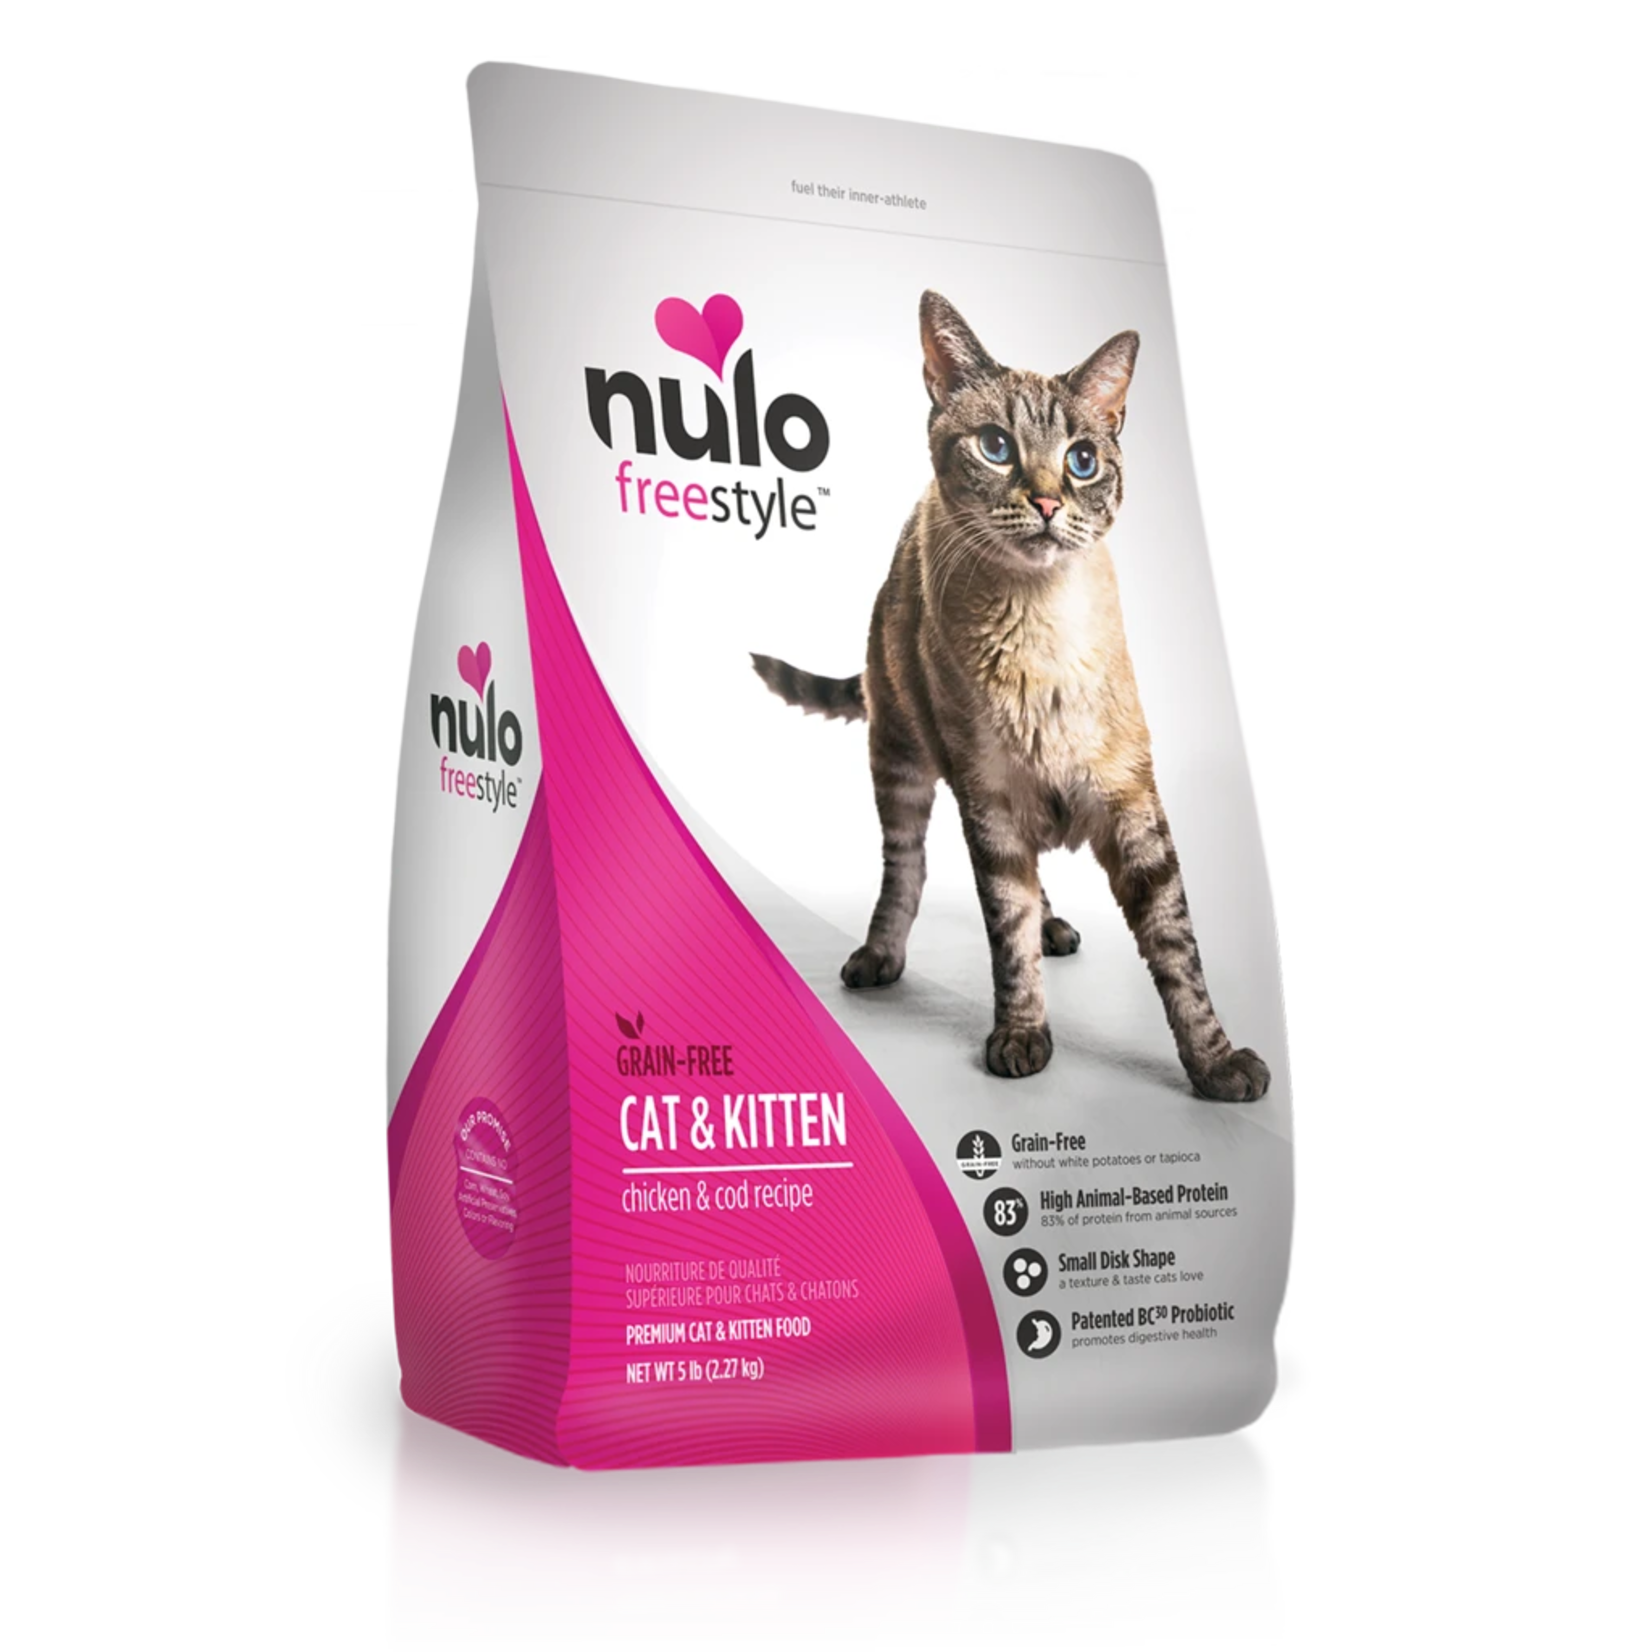 Nulo Pet Food Nulo FreeStyle - Grain-Free Cat & Kitten Chicken & Cod Recipe for Cats